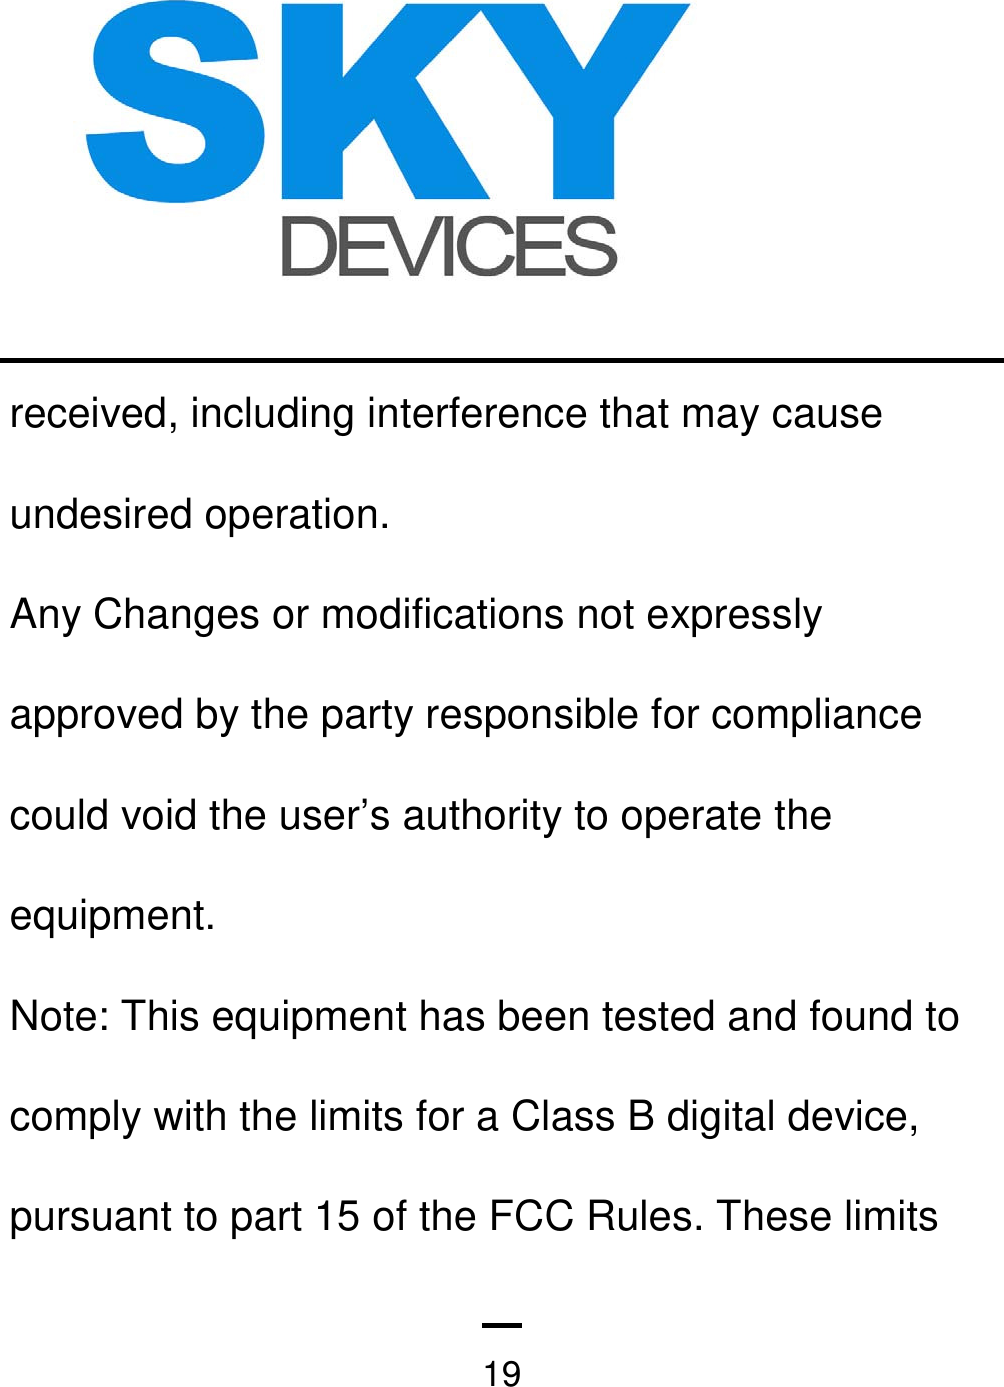   19received, including interference that may cause undesired operation. Any Changes or modifications not expressly approved by the party responsible for compliance could void the user’s authority to operate the equipment. Note: This equipment has been tested and found to comply with the limits for a Class B digital device, pursuant to part 15 of the FCC Rules. These limits 